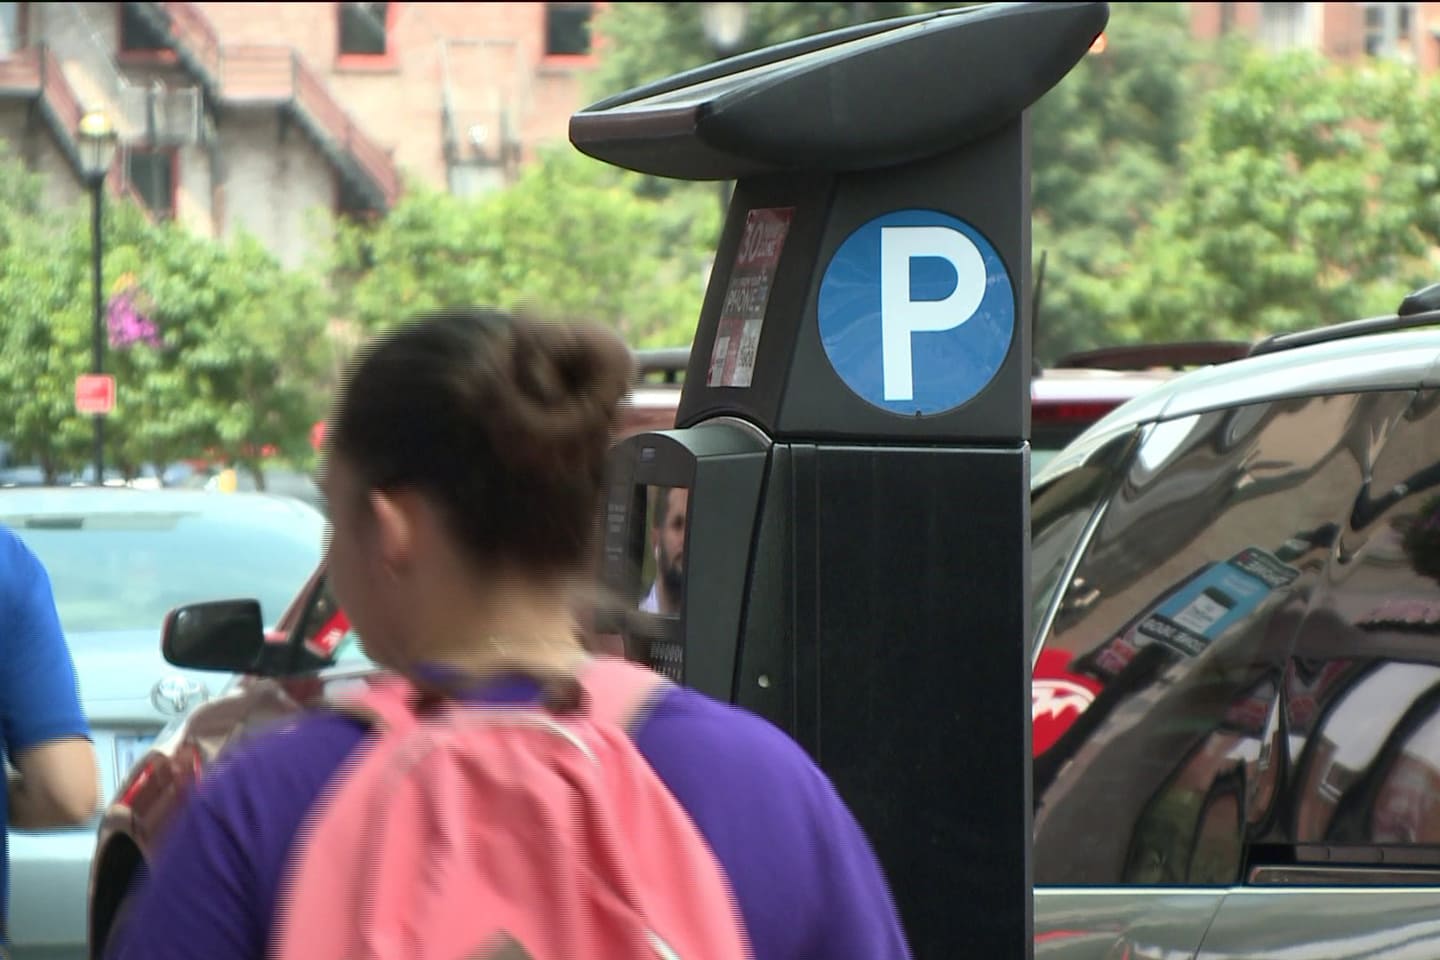 Hartford Parking Authority changes stance after rejecting coins as payment